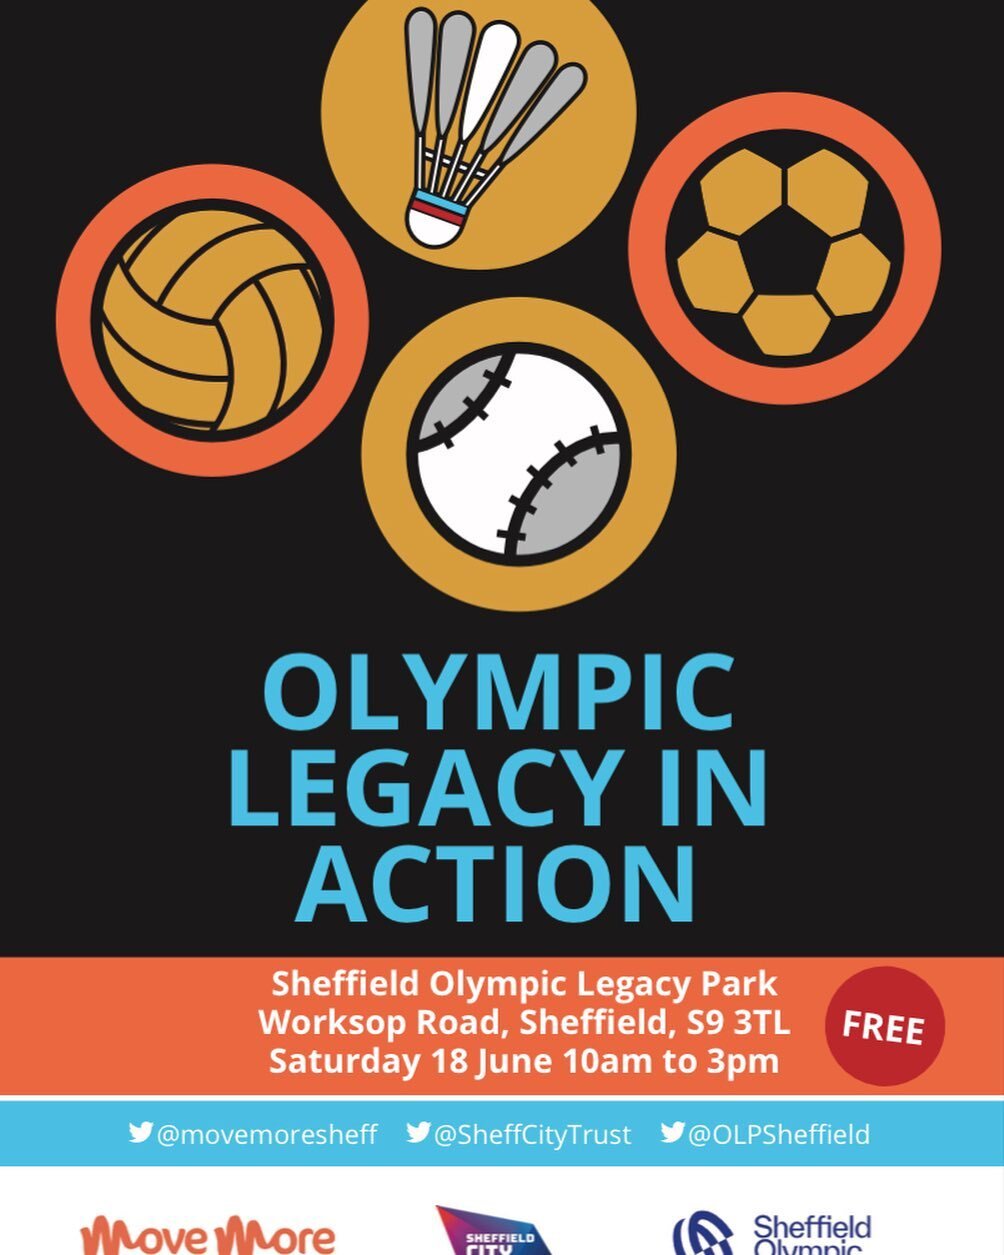 Olympic Legacy In Action

A family fun, free day of activities lands at Sheffield Olympic Legacy Park on Saturday 18 June from 10.00am - 3.00pm 

There will be loads of free activities to take part in, including paddleboarding, kayaking, football, te